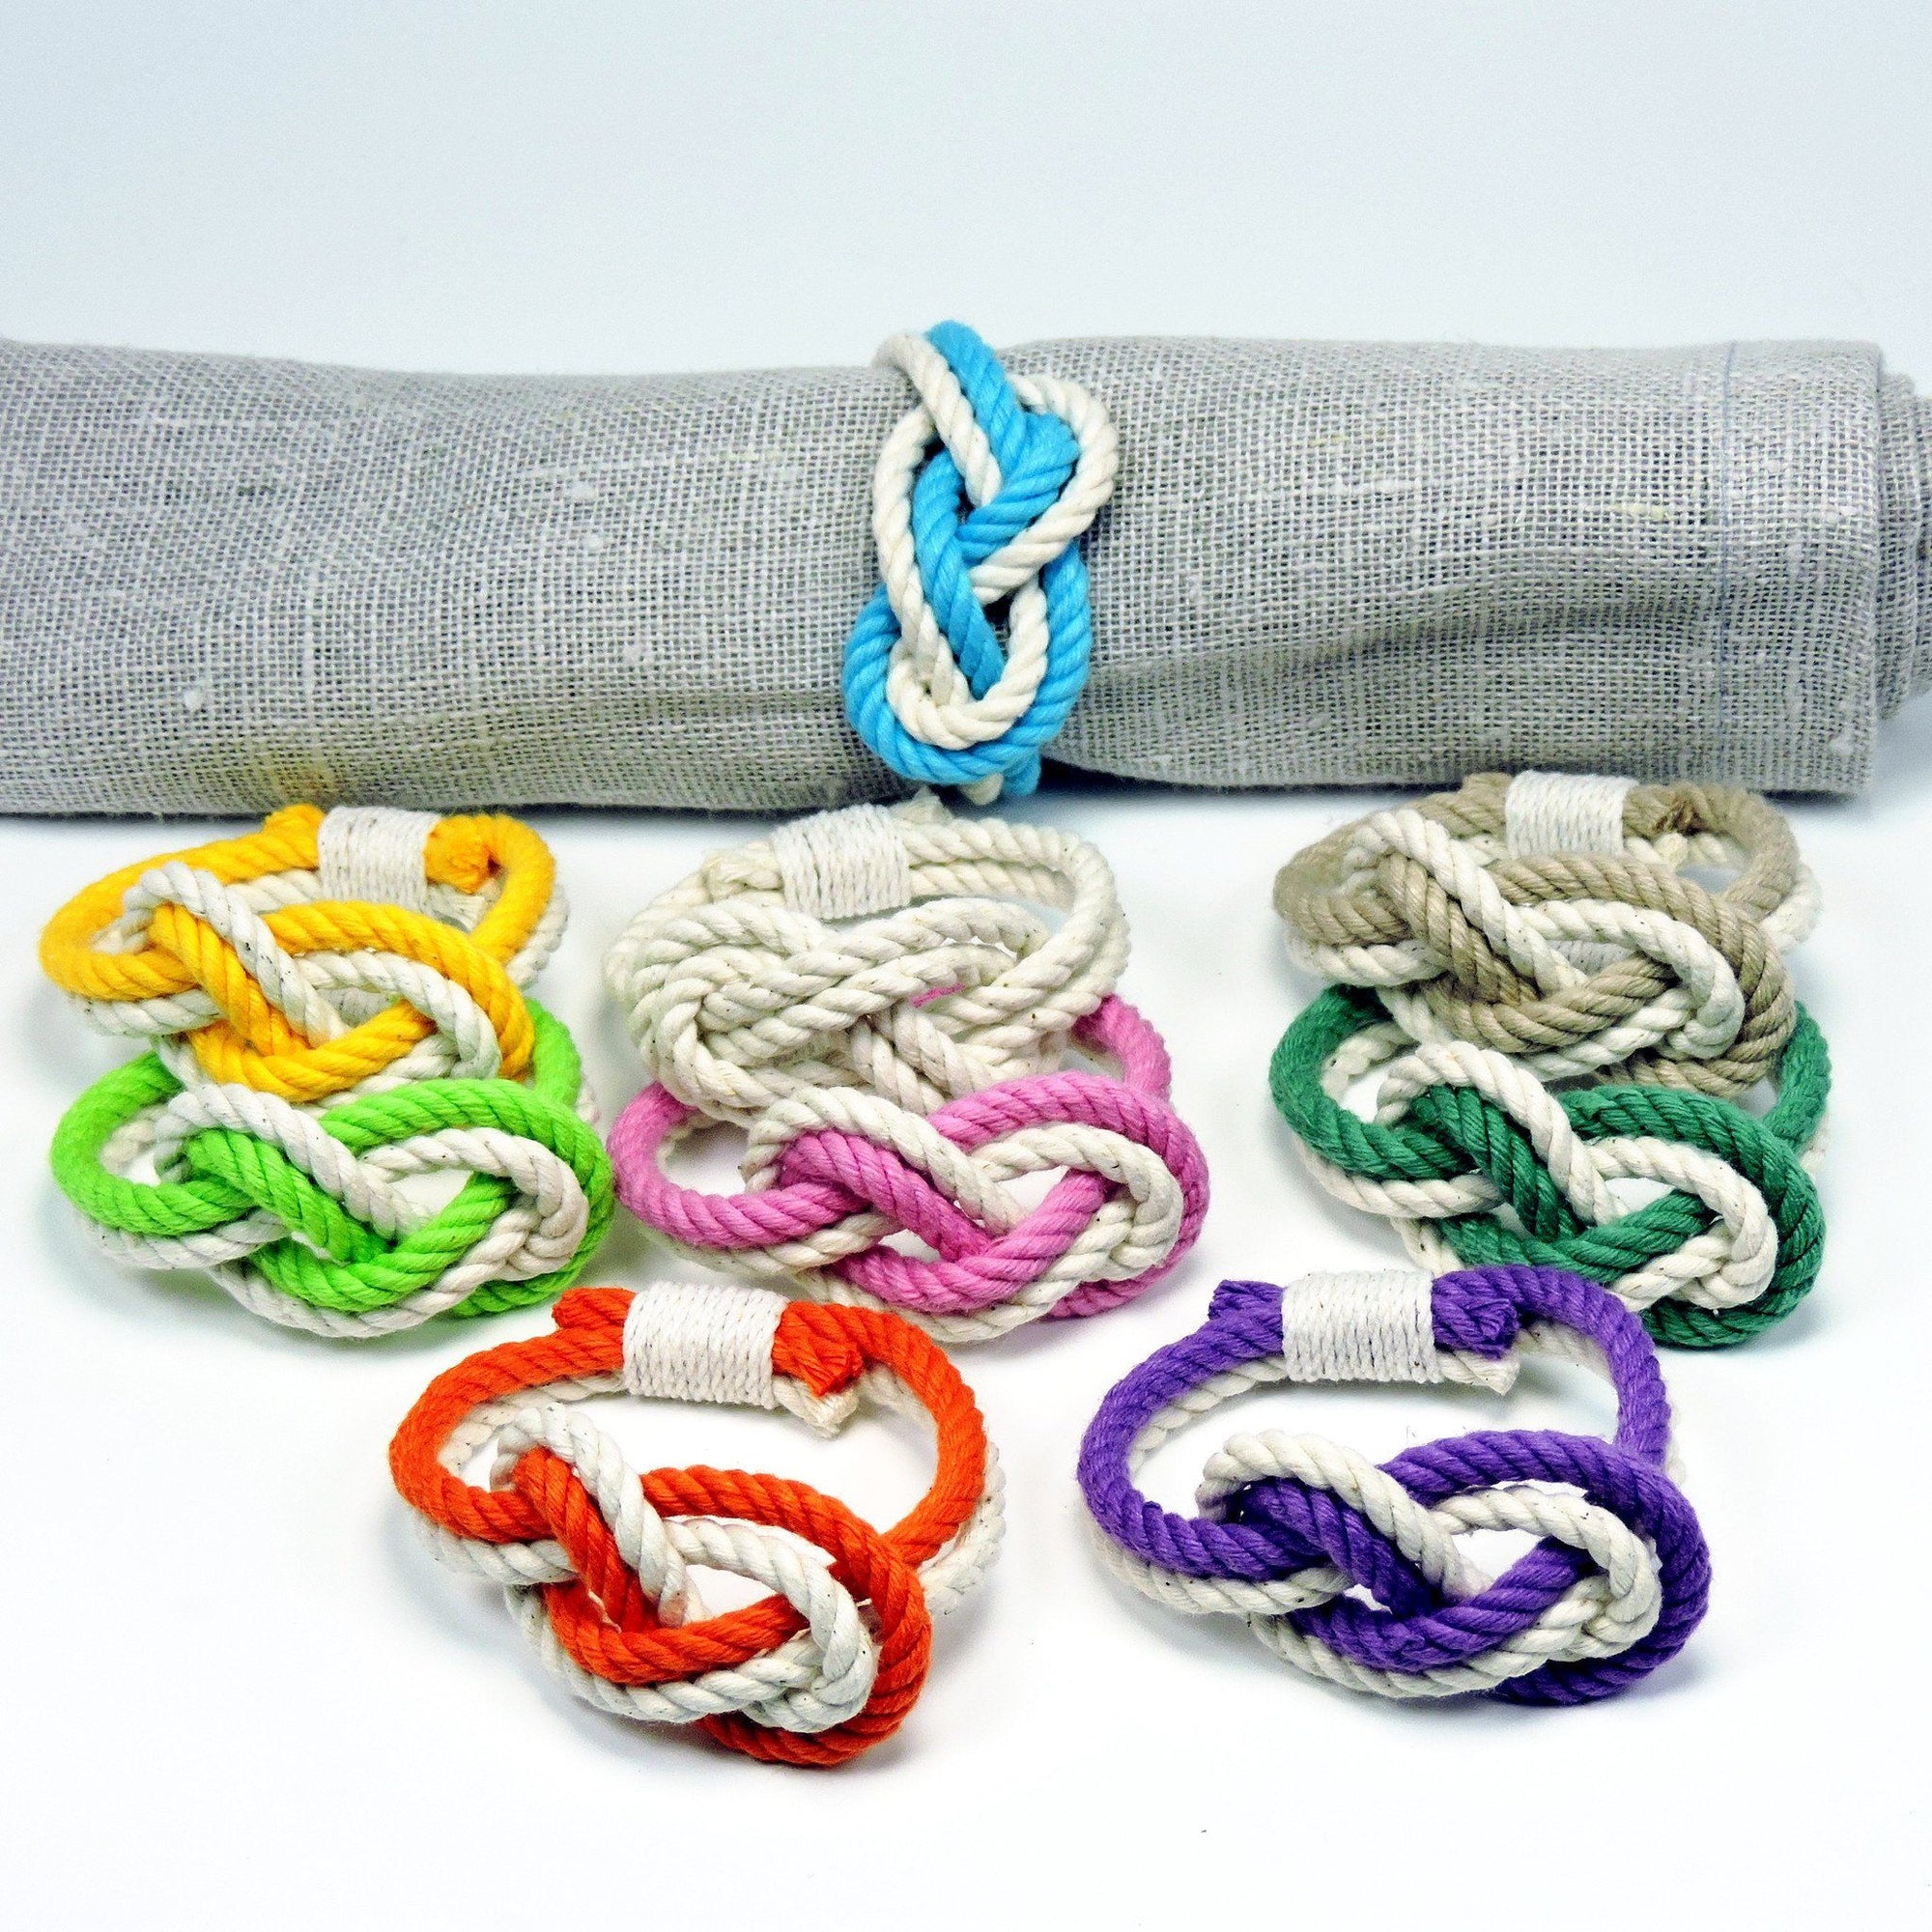 Nautical Knot Figure Eight Infinity Knot Napkin Rings, Tropical Colors, Set of 4 handmade at Mystic Knotwork